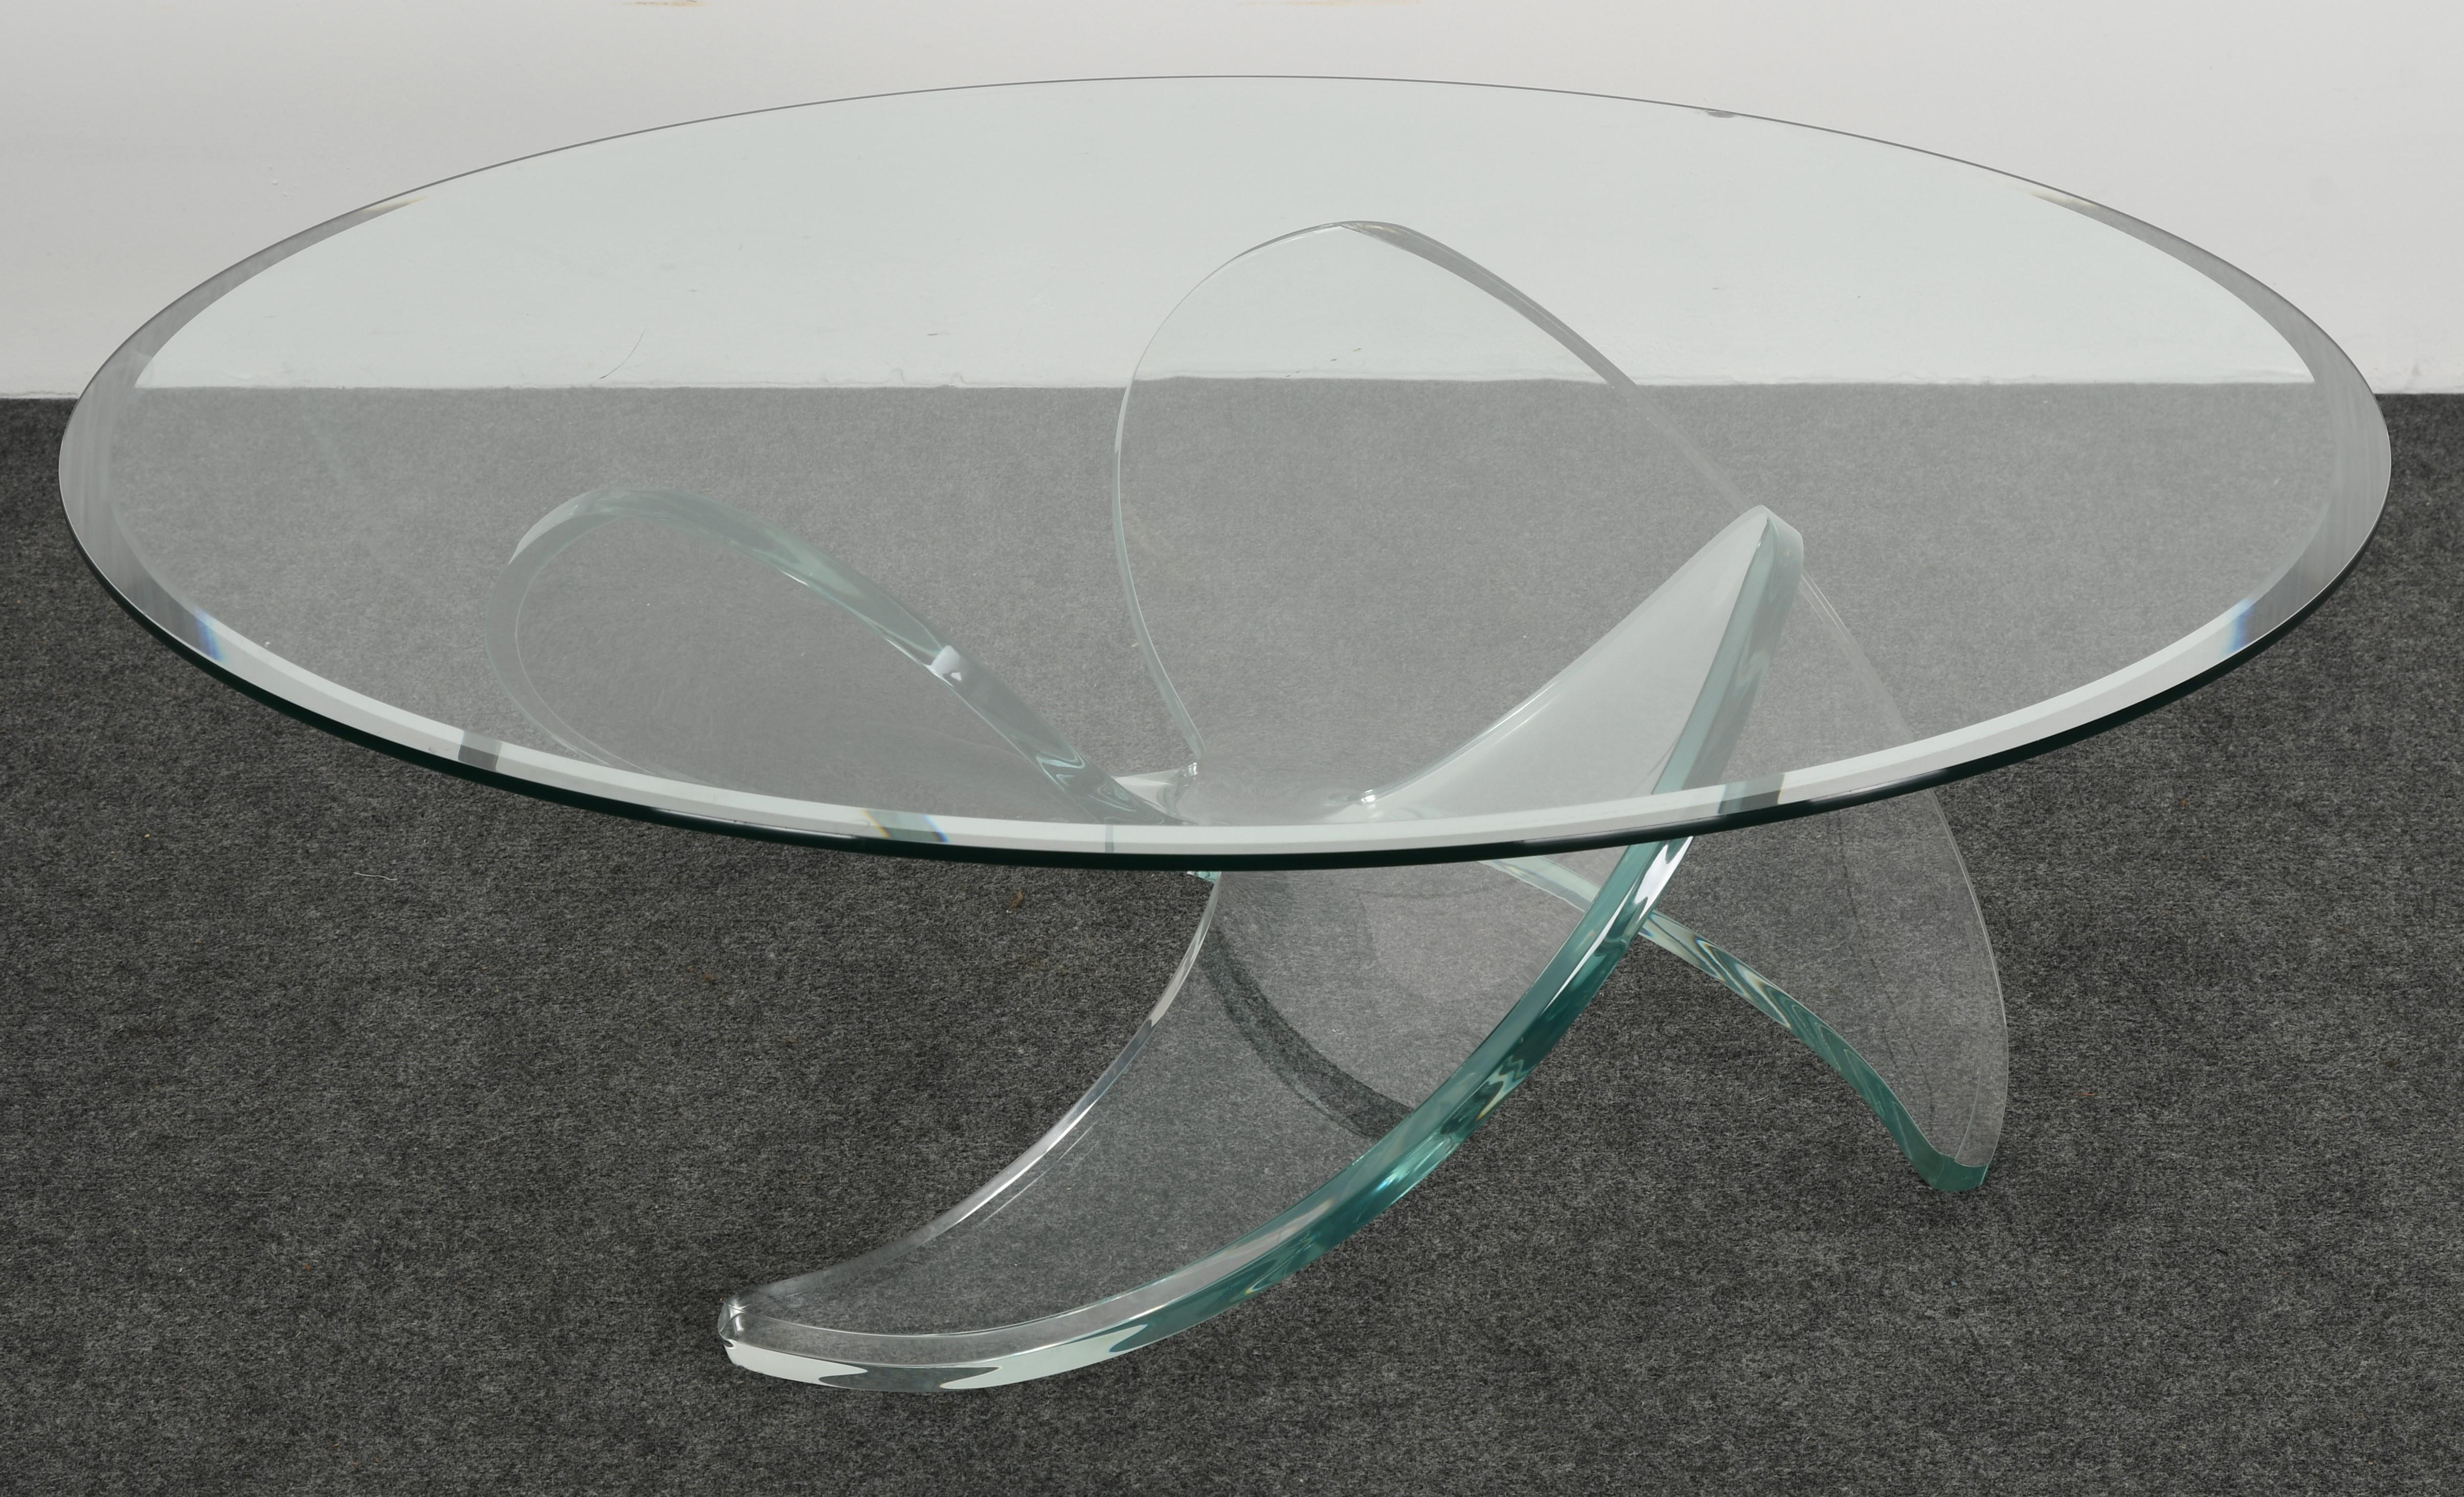 A Mid-Century Modern Lucite propeller coffee or cocktail table in the style of Knut Hesterberg. This table comes with a new glass top shipped to your location. Choice of beveled or non-beveled glass. The Lucite base is in very good condition. The